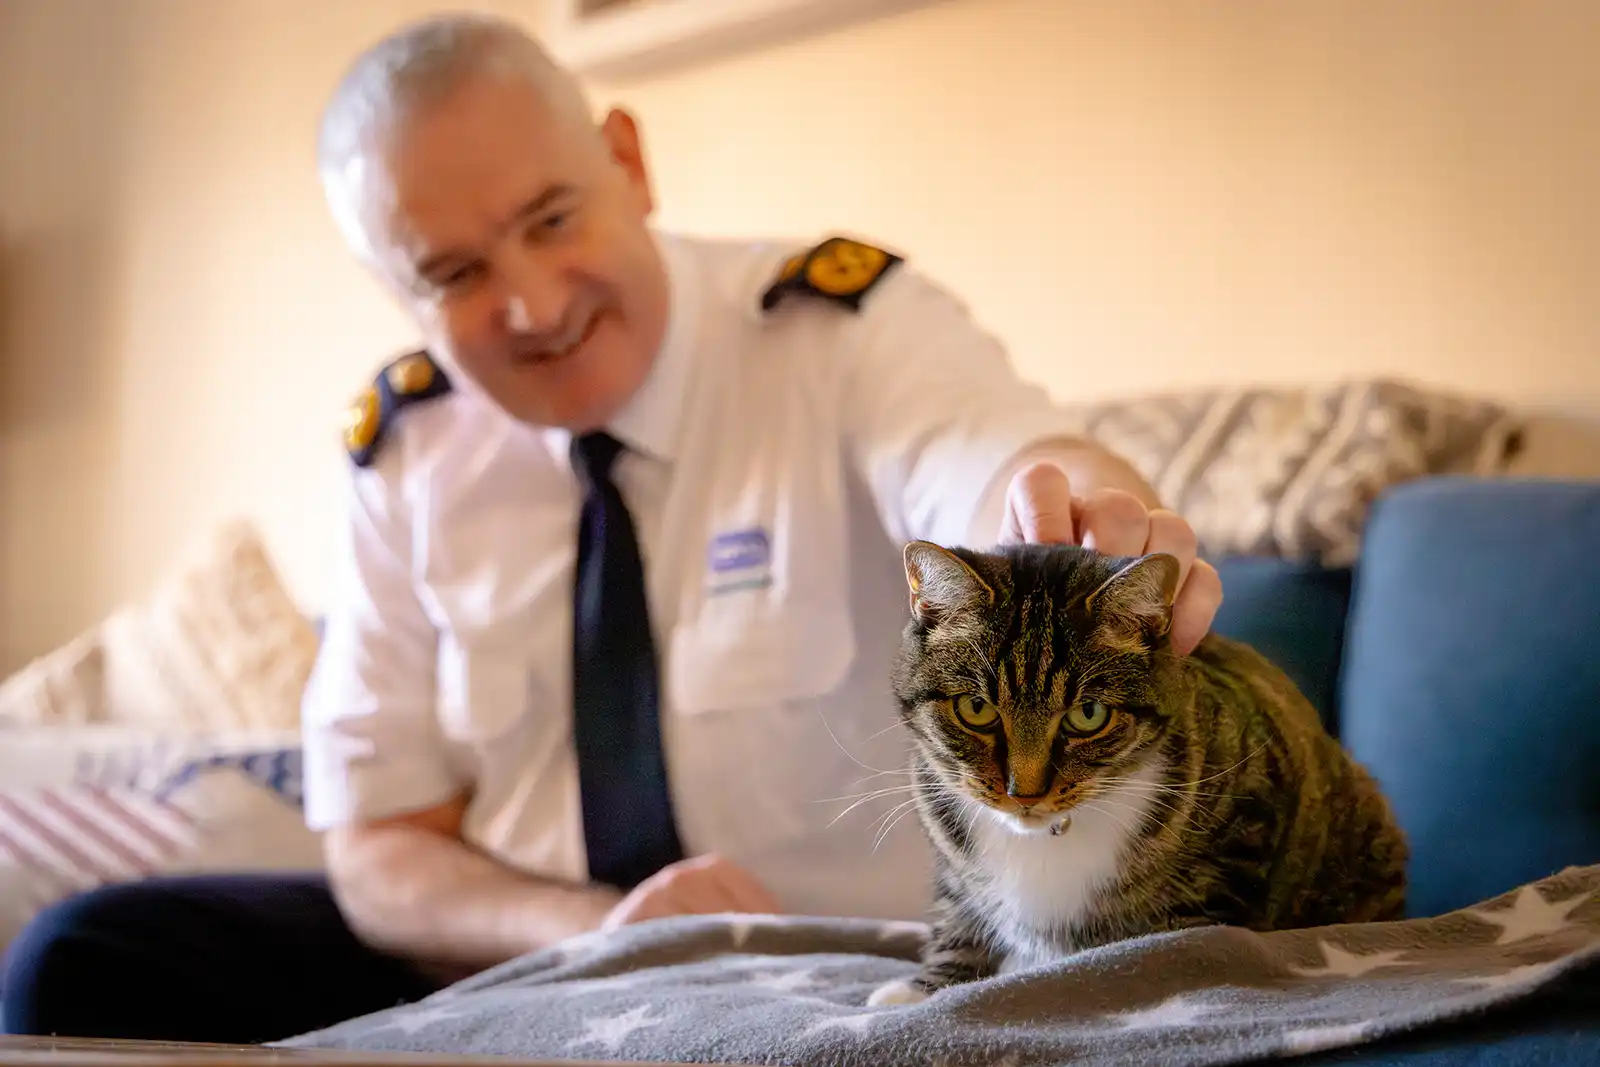 Dermot Murphy with a rescued cat. Picture: RSPCA